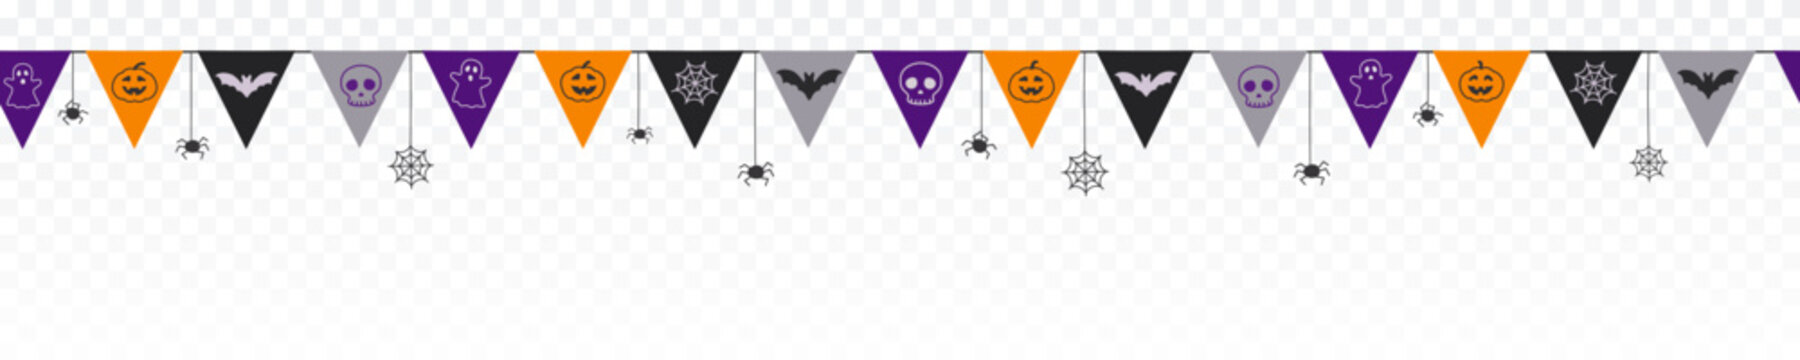 Halloween black, violet and orange flags garland. Festival seamless banner or border with bats, spider web, ghost and pumpkins. Vector party chain decoration isolated on transparent background